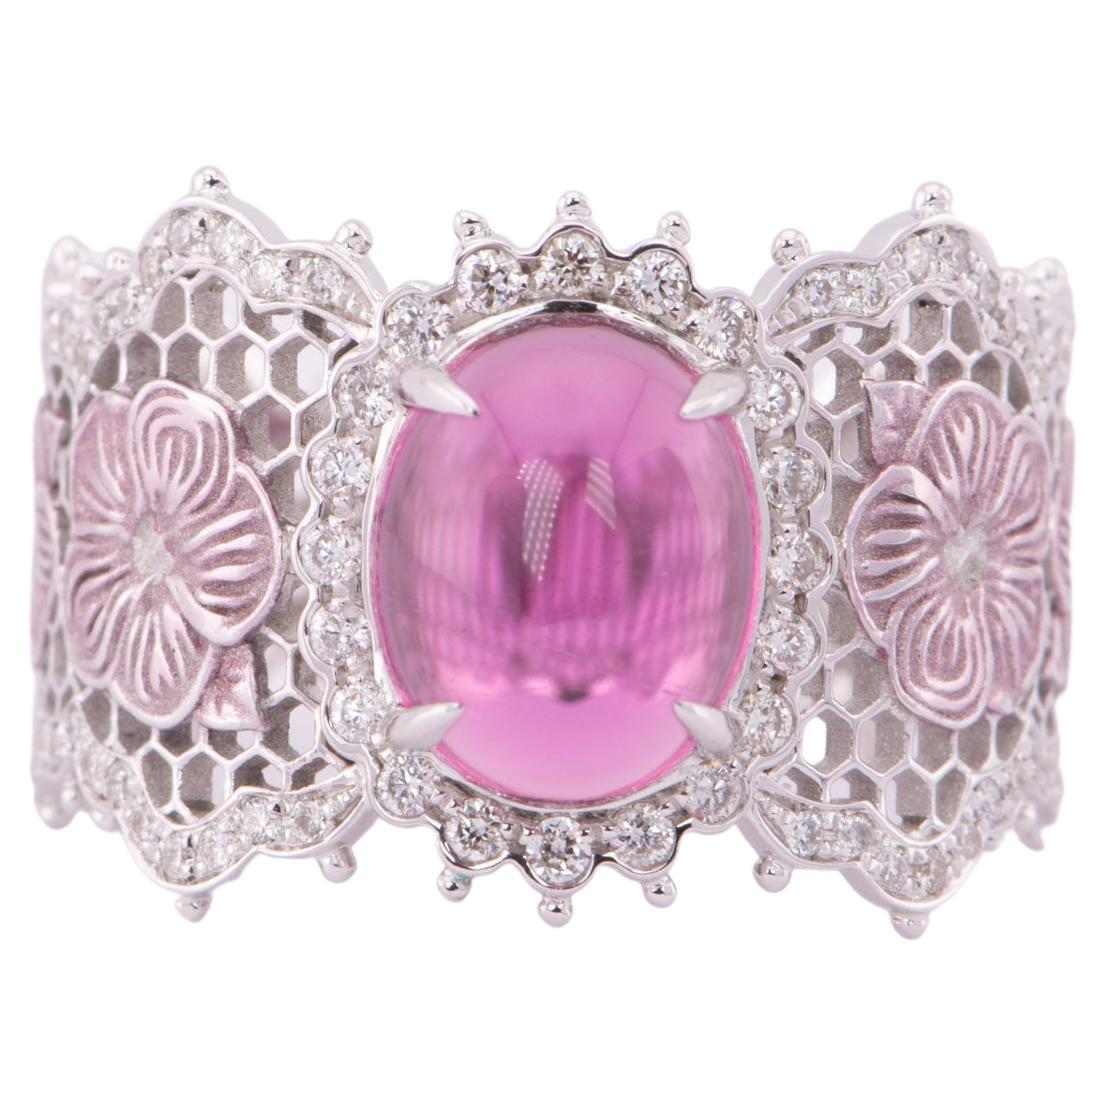 2.52ct Rubellite Tourmaline Ring 18K White Gold Wide Band Lace Floral Design For Sale